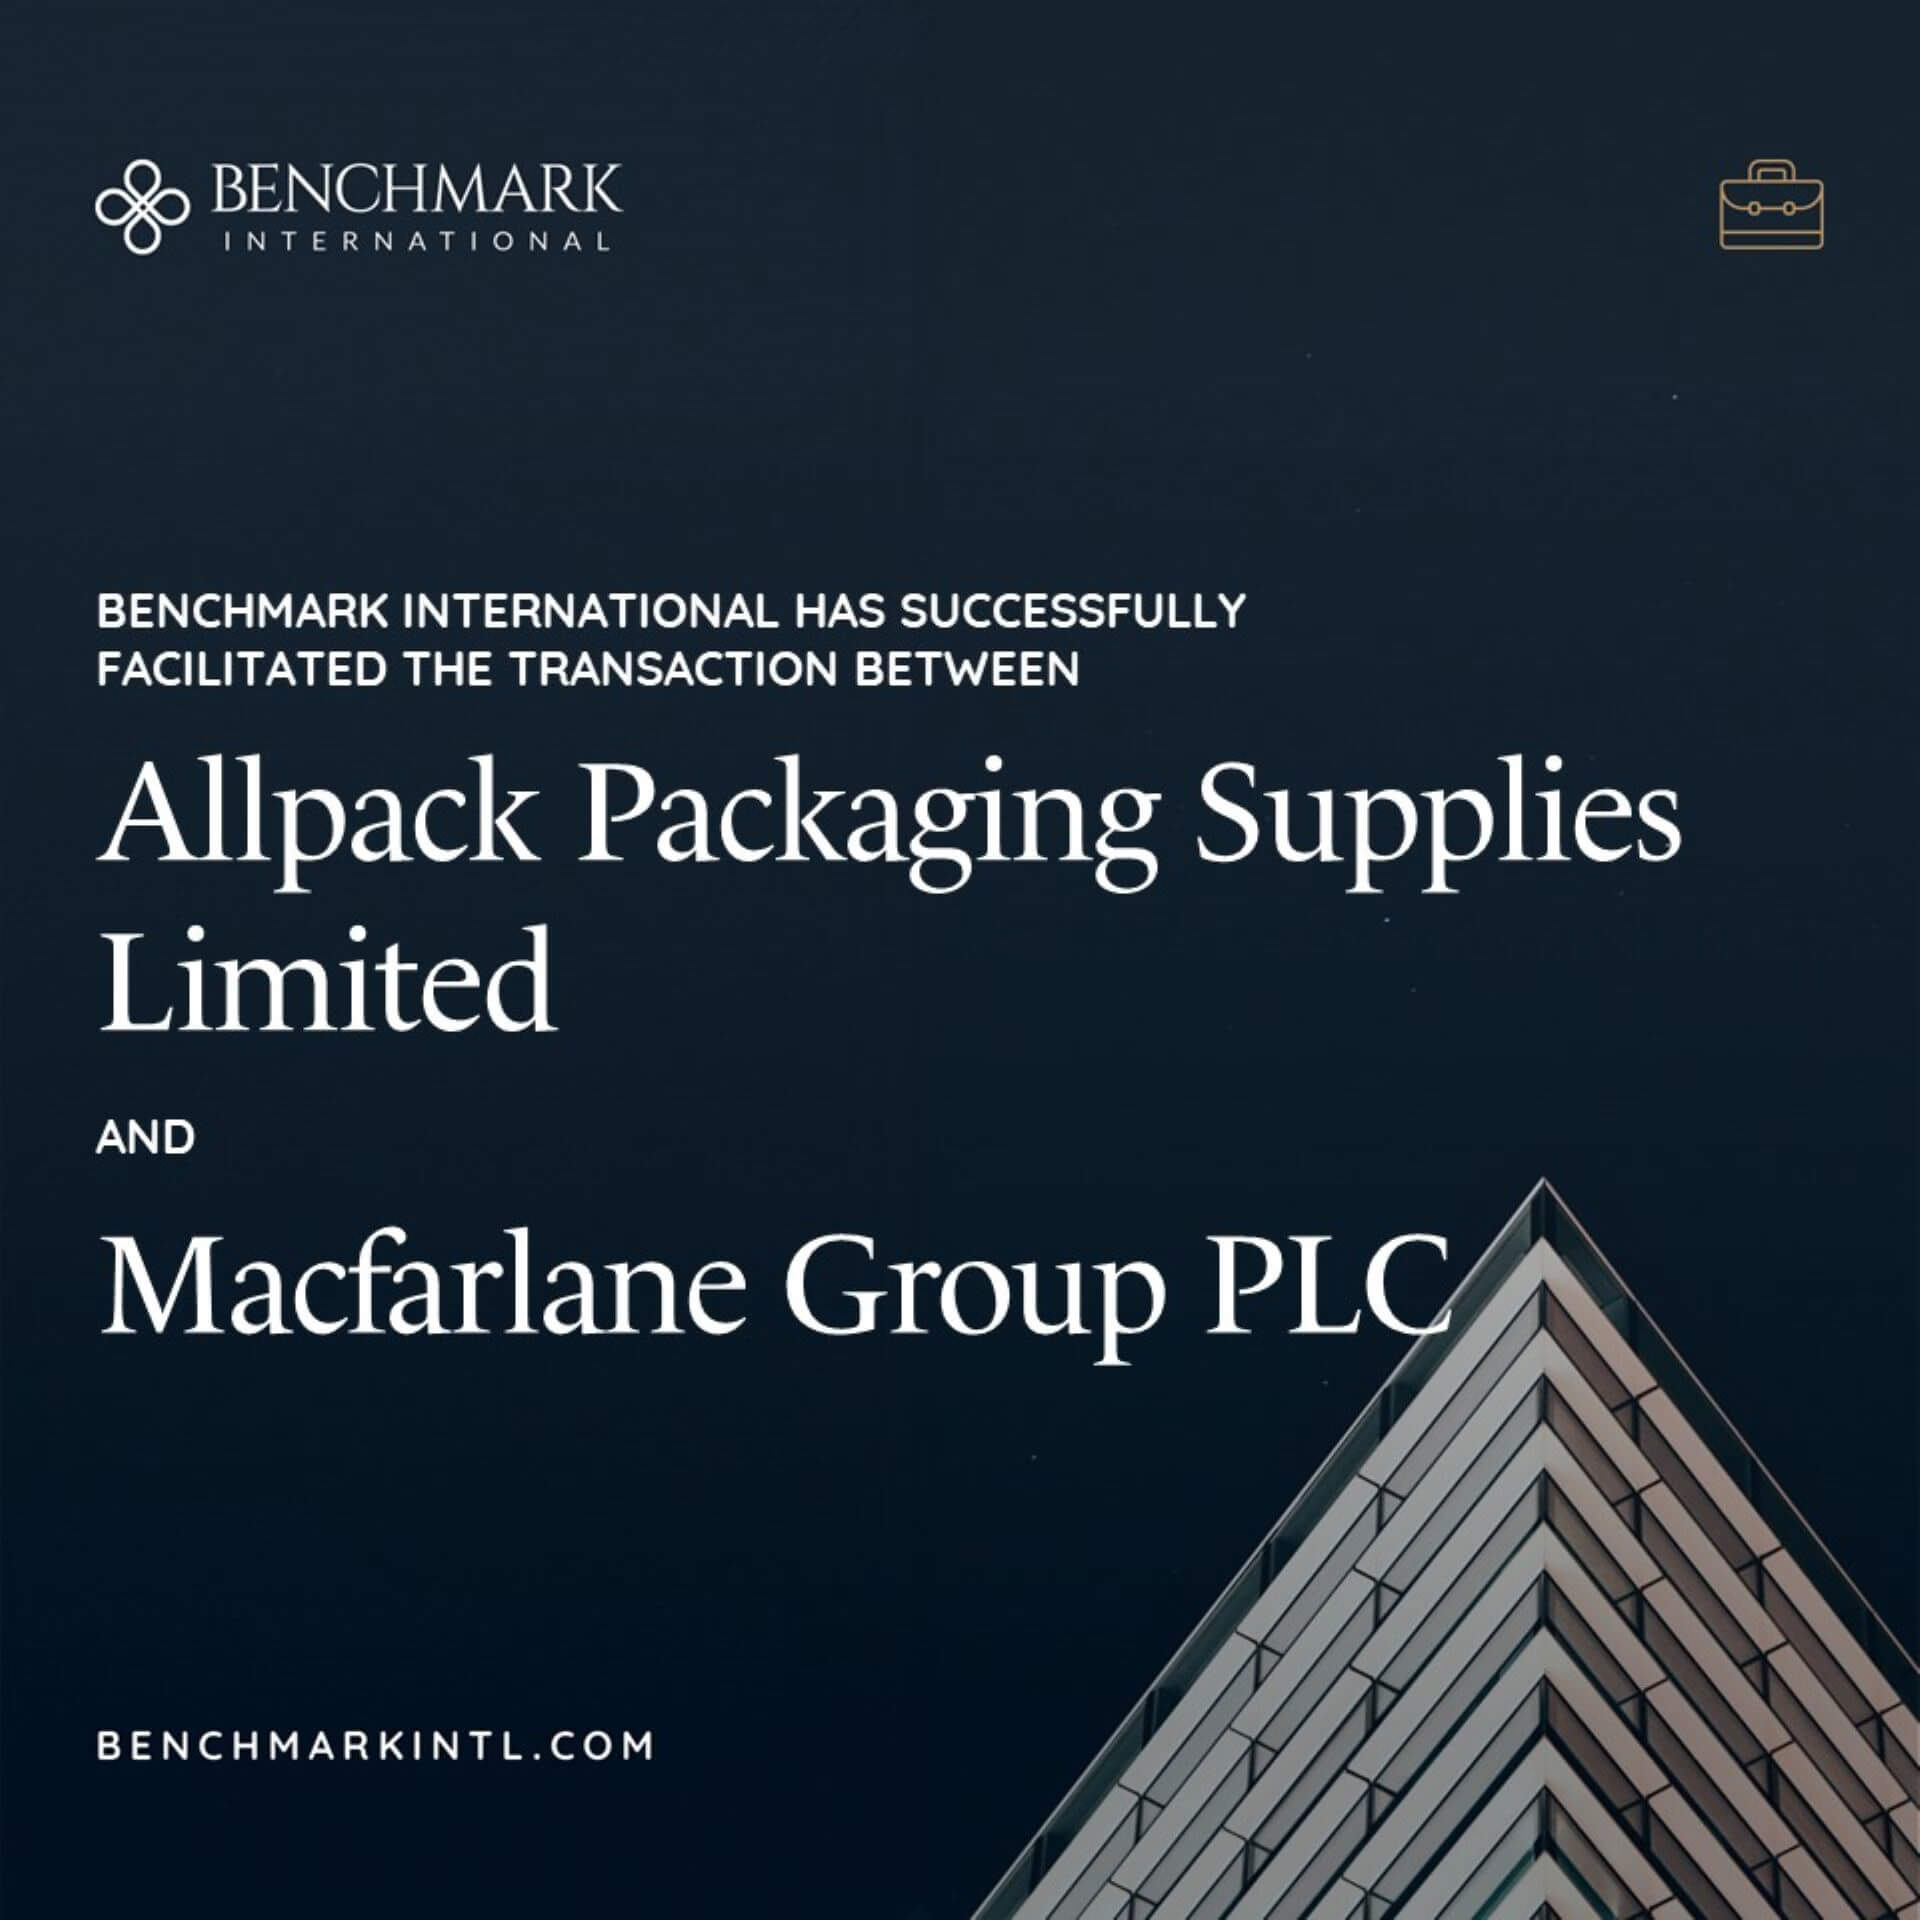 Allpack Packaging Supplies acquired by Macfarlane